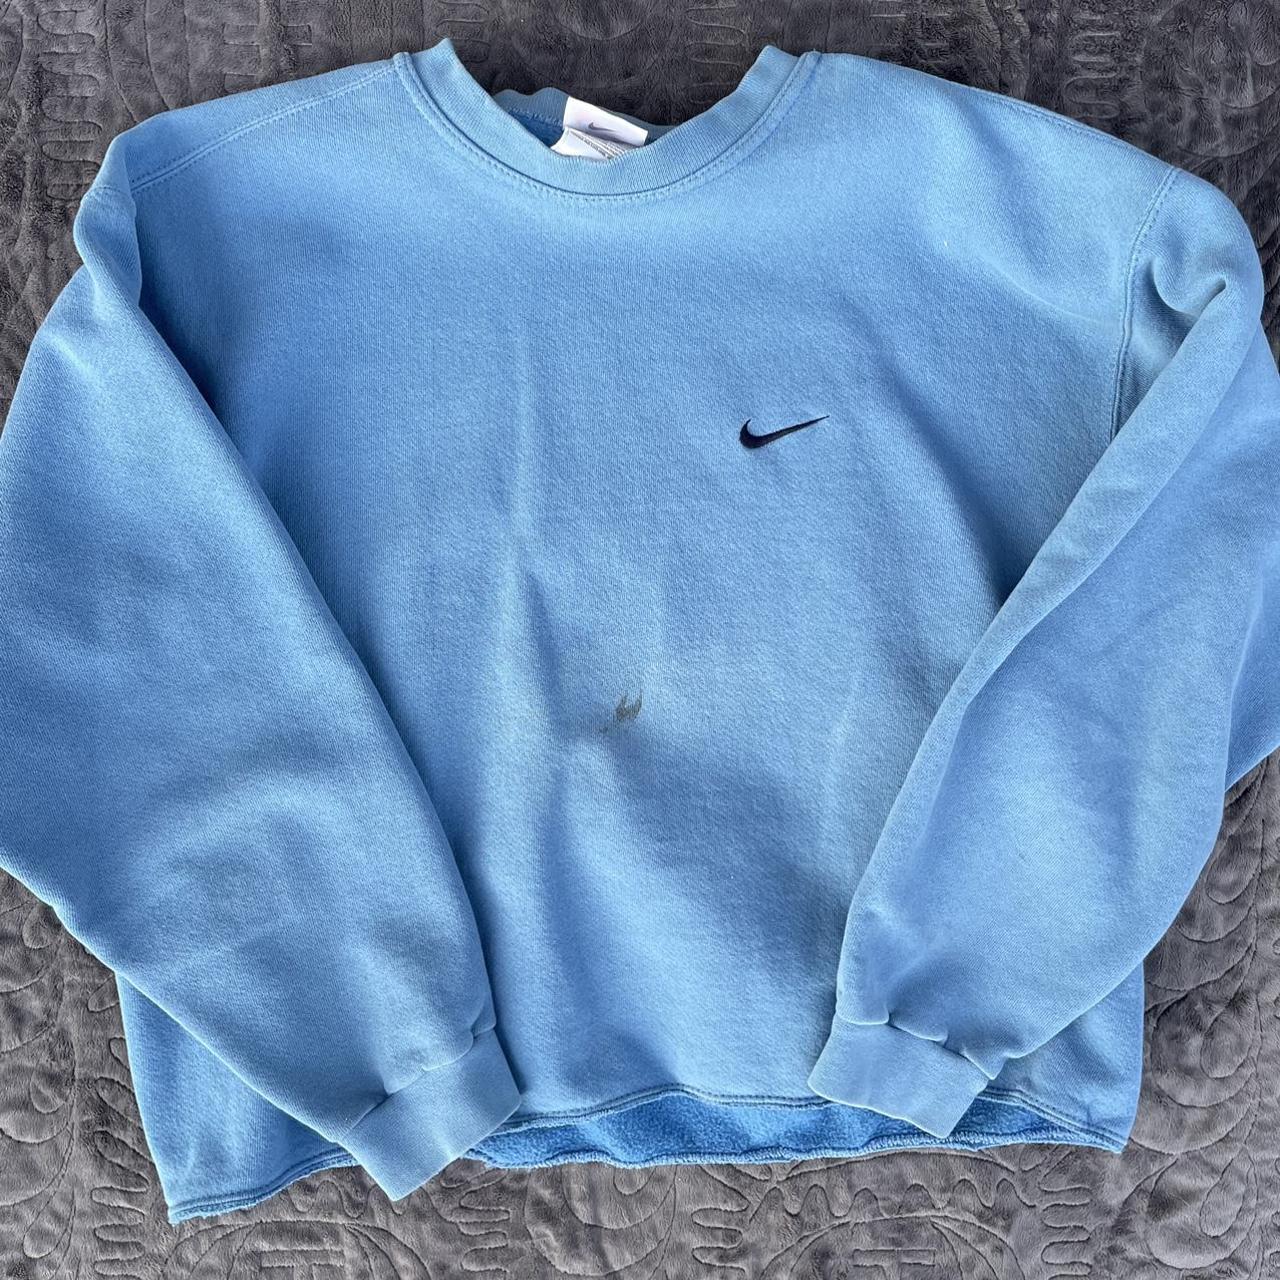 Cool Nike crewneck size large with great color... - Depop